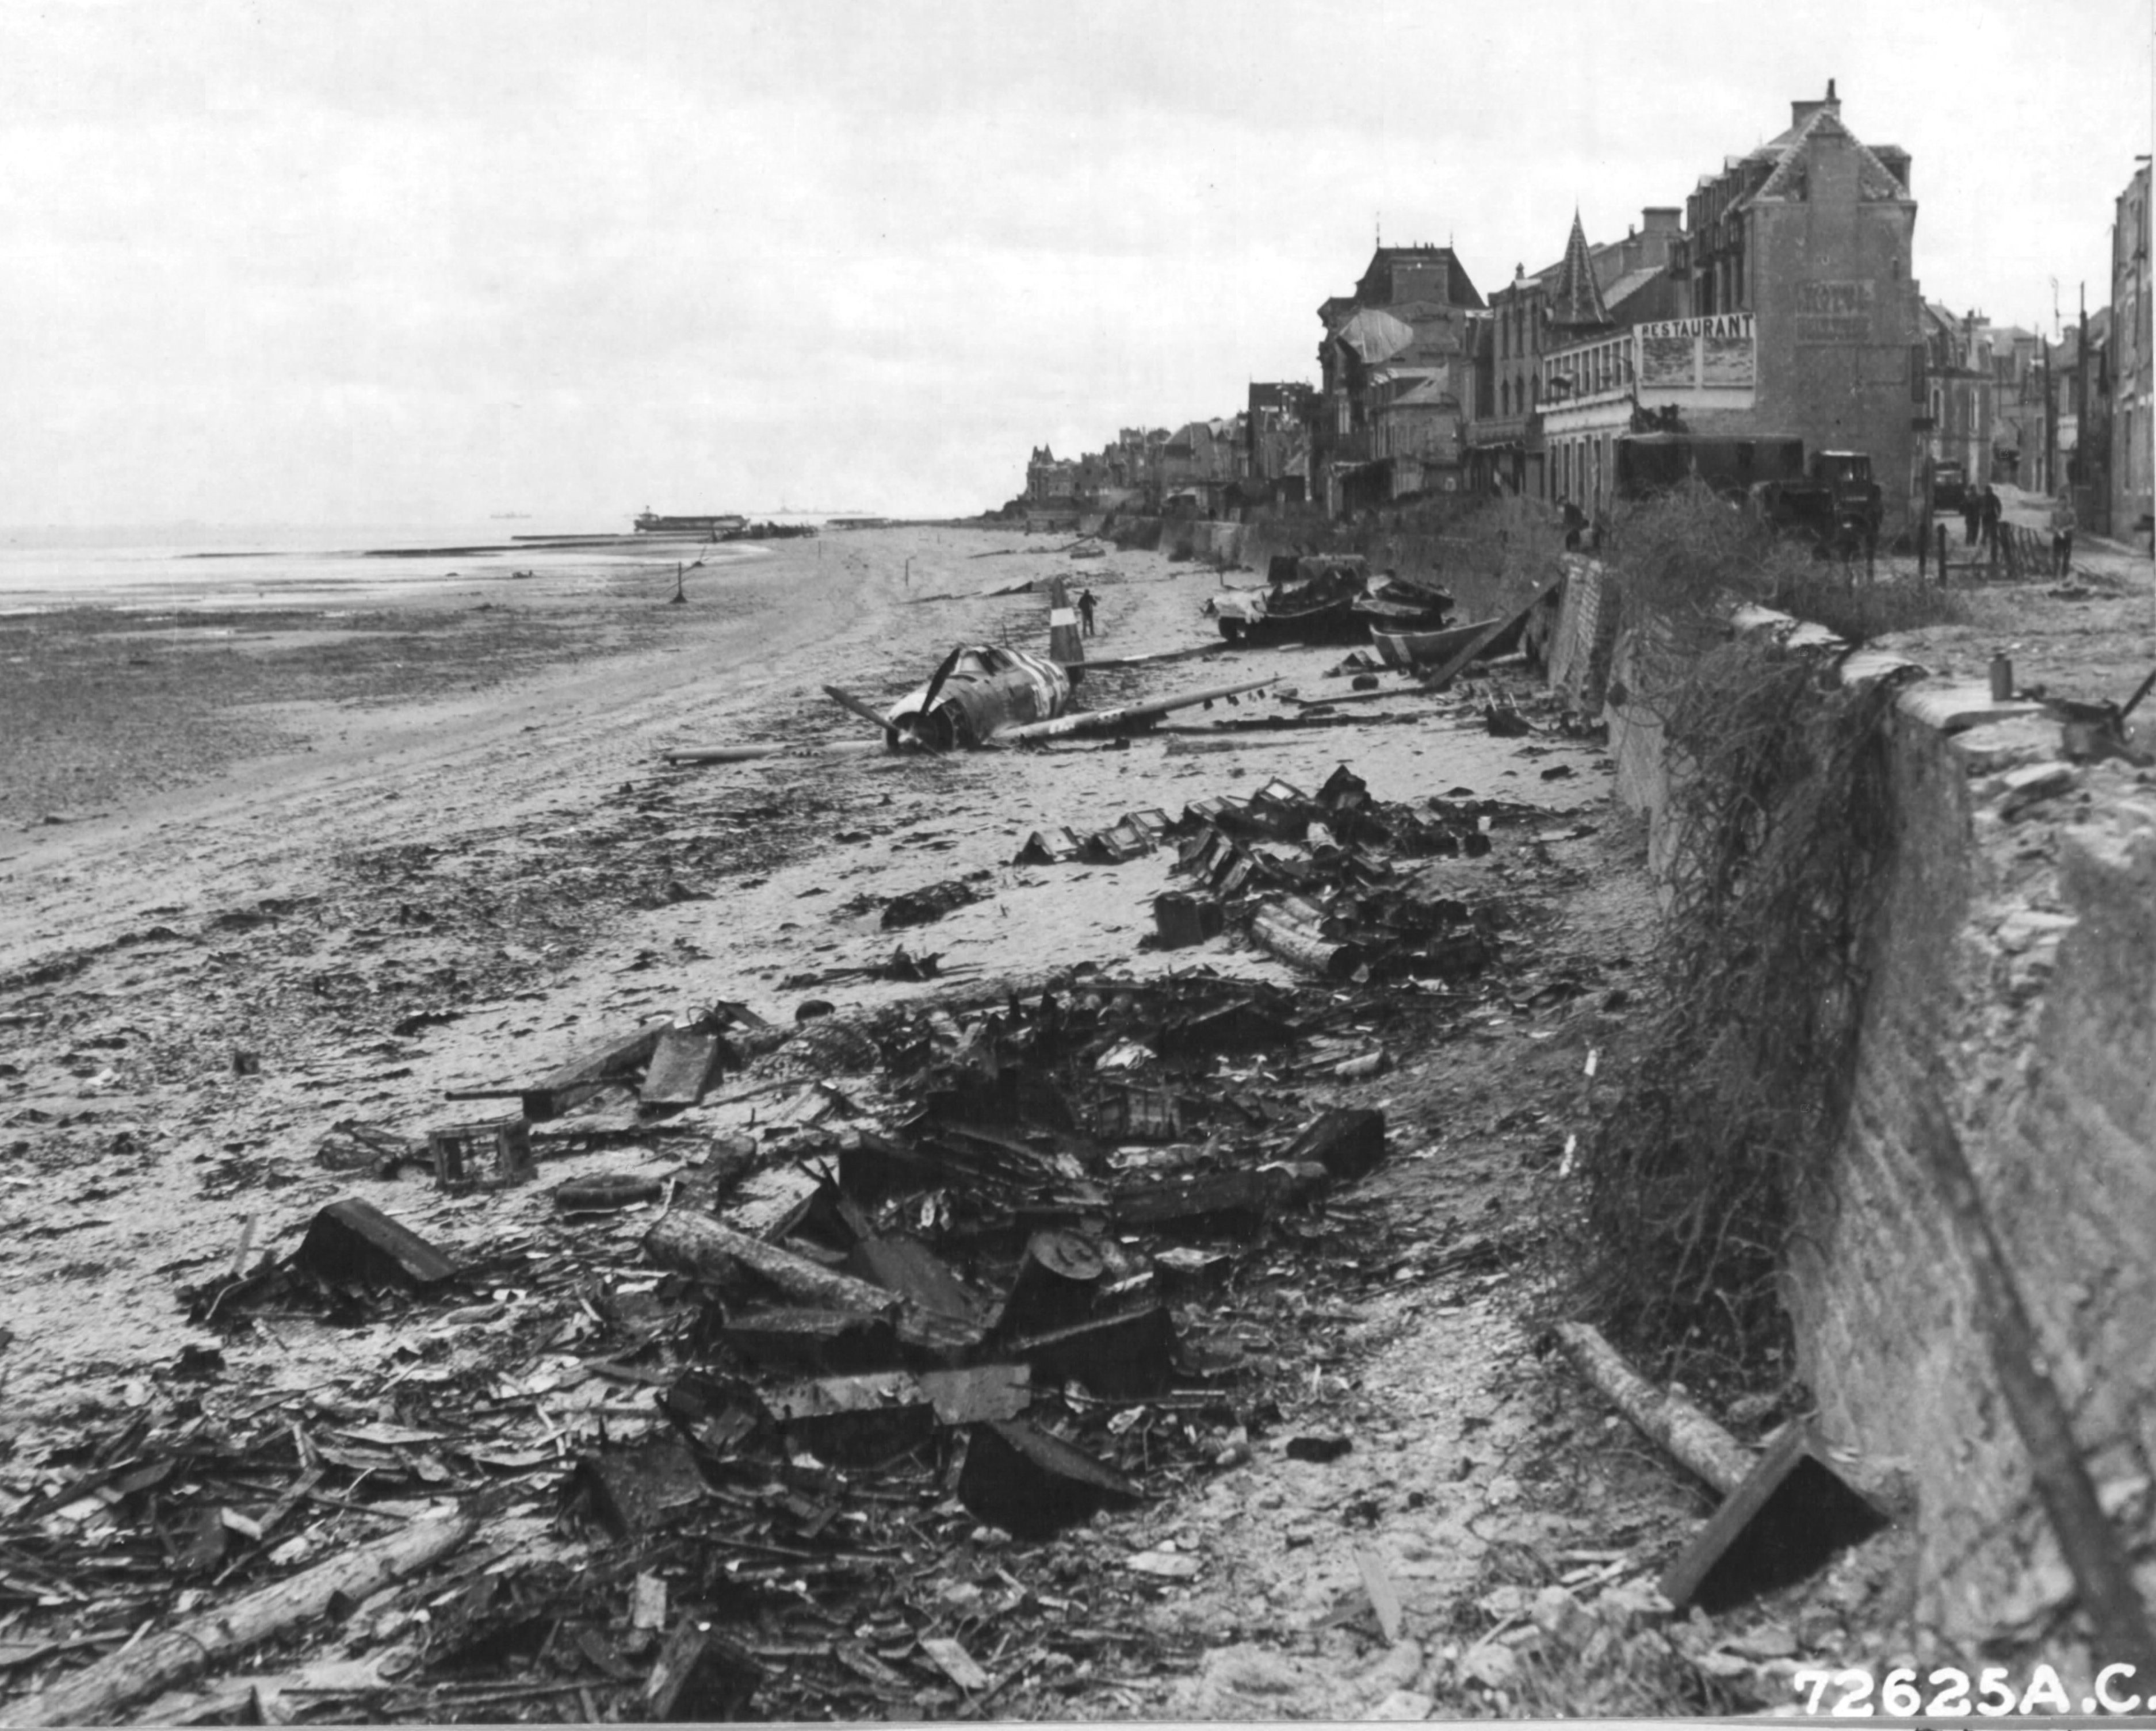 2 Jul 1944 photo of the wreckage left on Sword Beach following the D-Day landings in Normandy, France; in this case, a P-47 Thunderbolt that was shot down 10 Jun 1944 on a mission to Cherbourg, France. Photo 2 of 2.